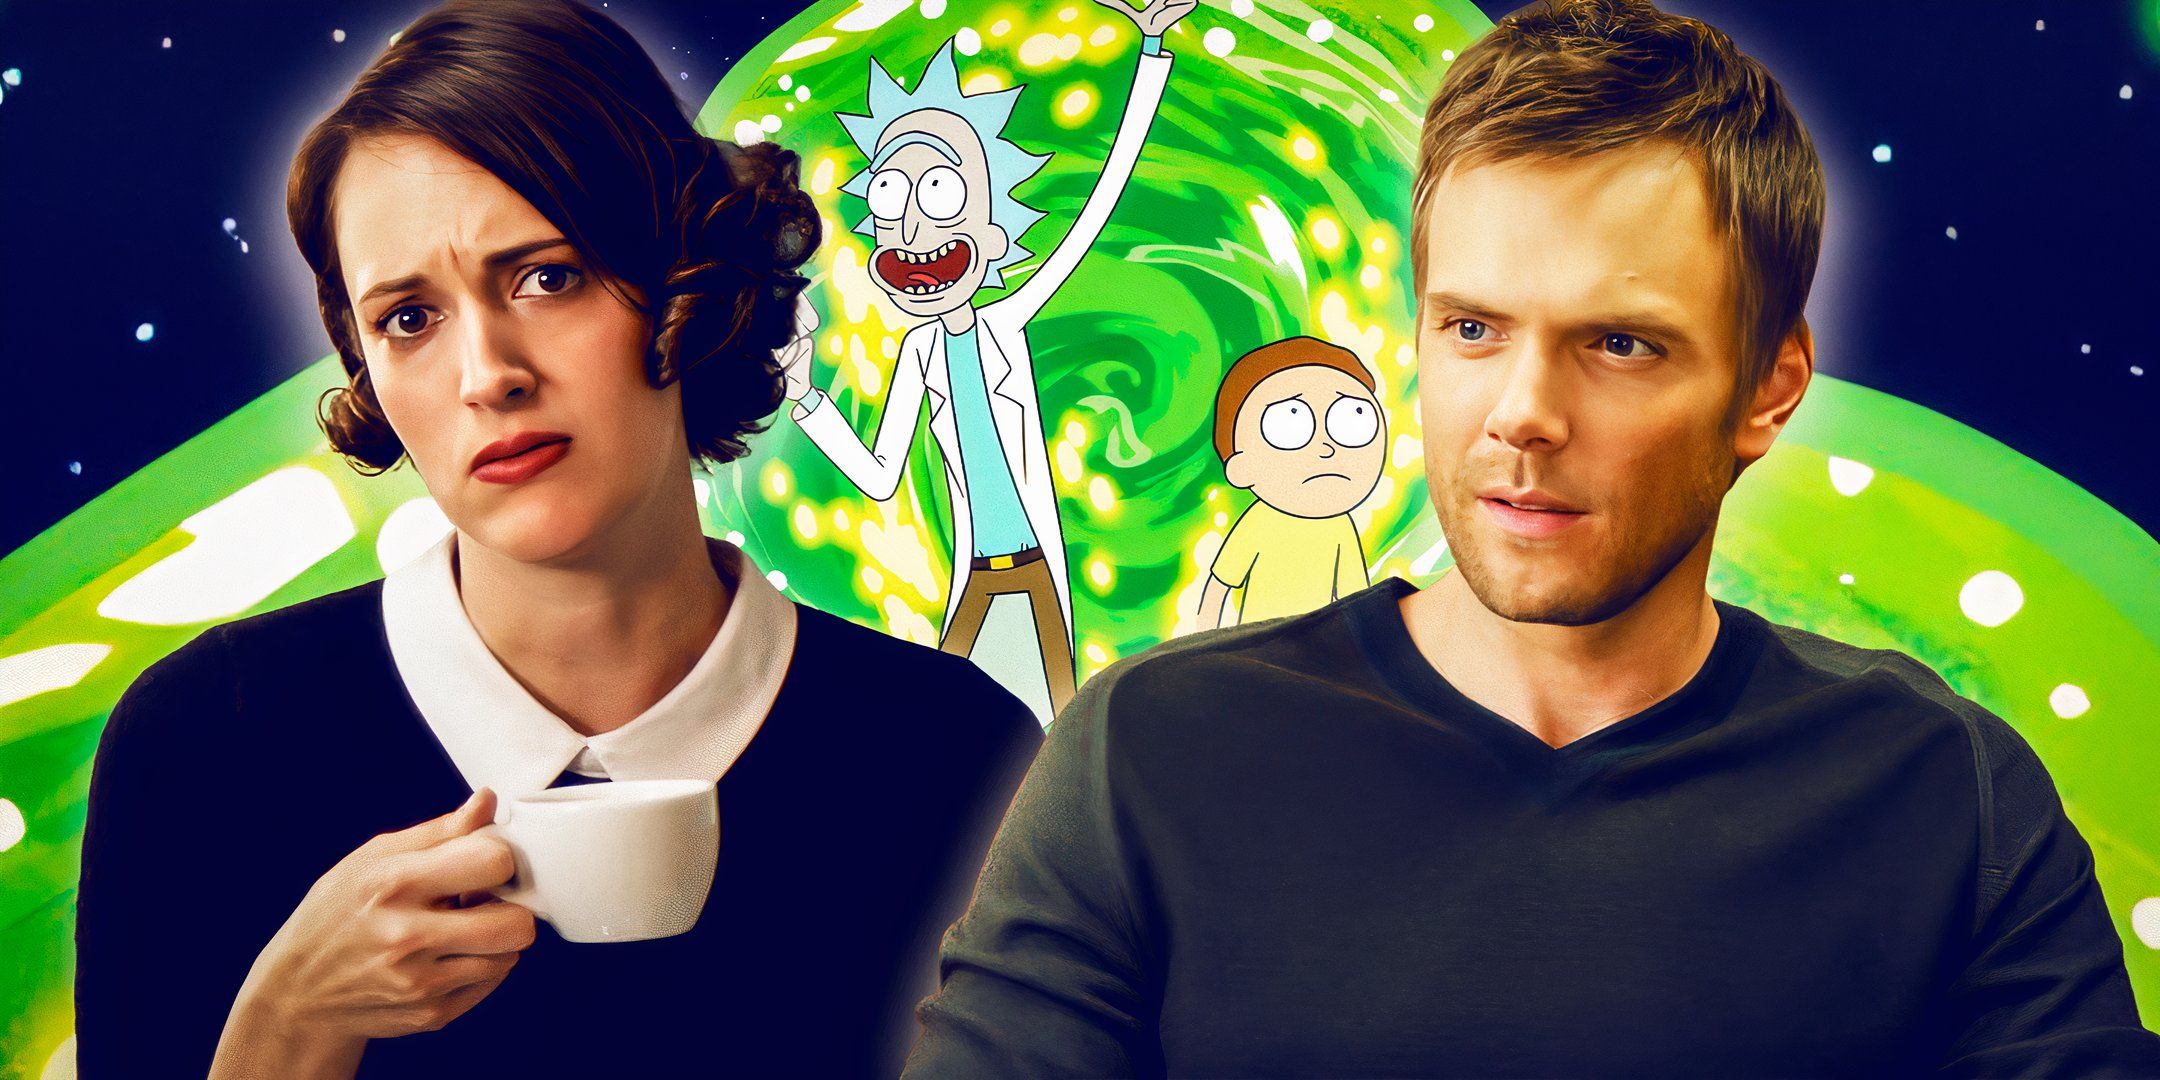 Phoebe Waller Bridge as Fleabag from Fleabag, Joel McHale as Jeff Winger from Community, and Rick and Morty.